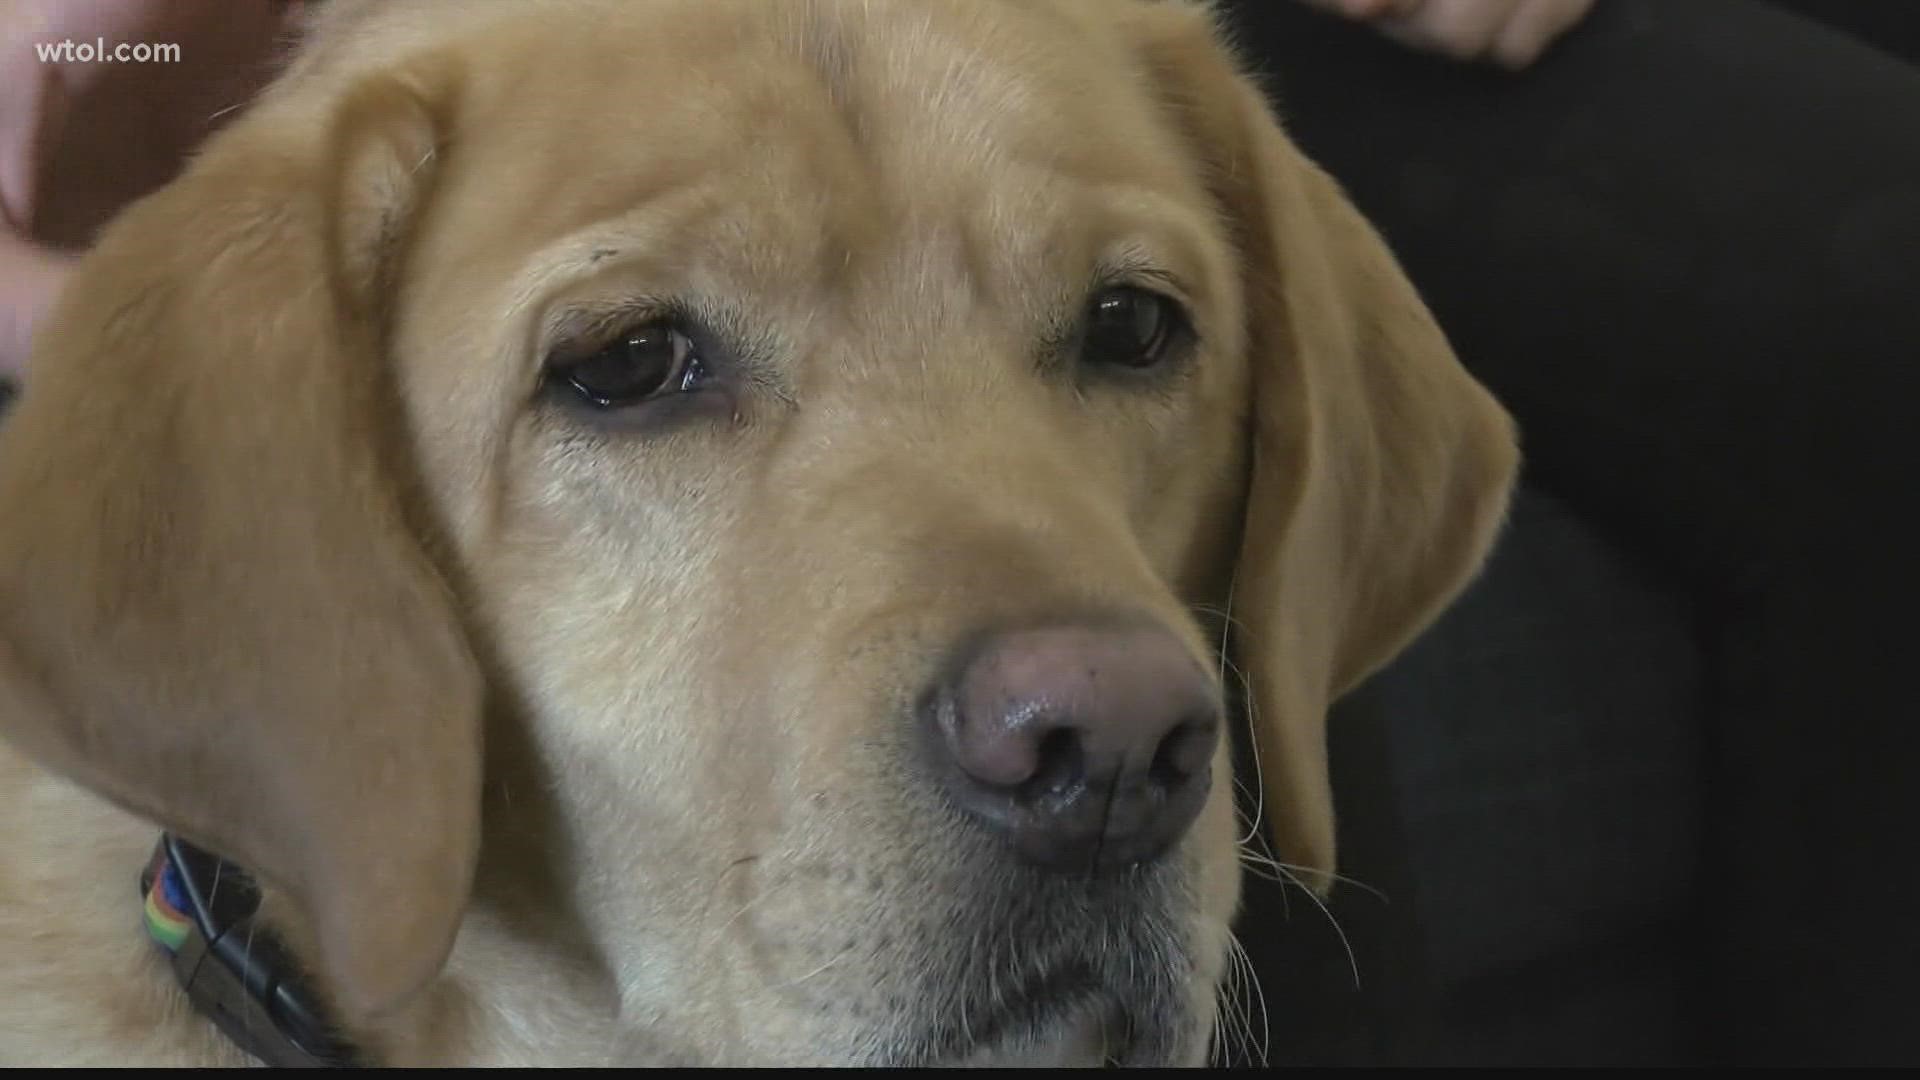 A therapy dog named Maize has been part of the Sylvania Schools family for three years. Now, students want to help make sure more dogs like Maize can improve lives.